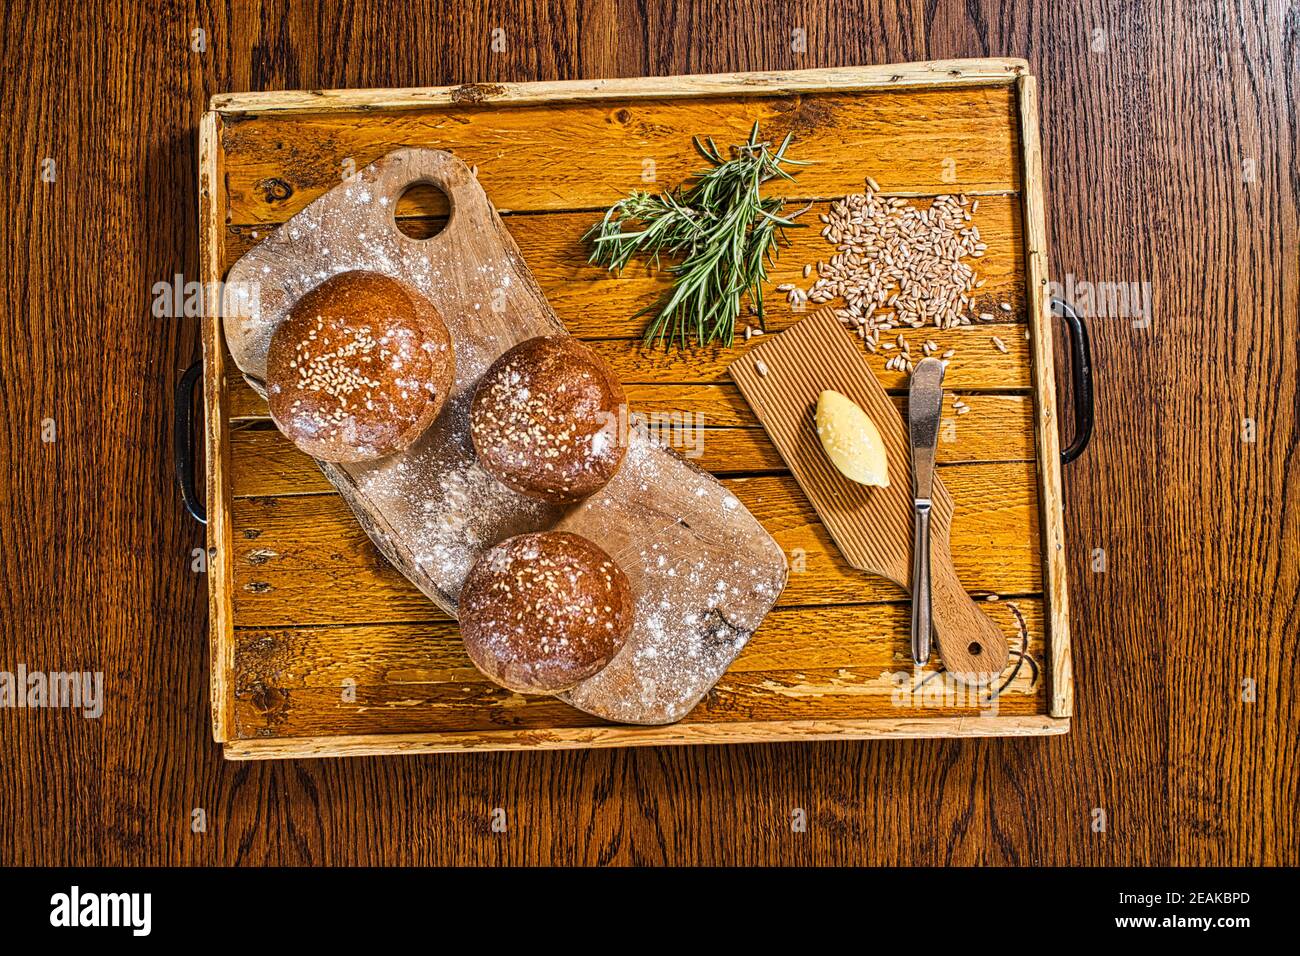 GREAT BRITAIN / England / freshly baked bread rolls of rye and wheat homemade/ making artisan bread. Stock Photo